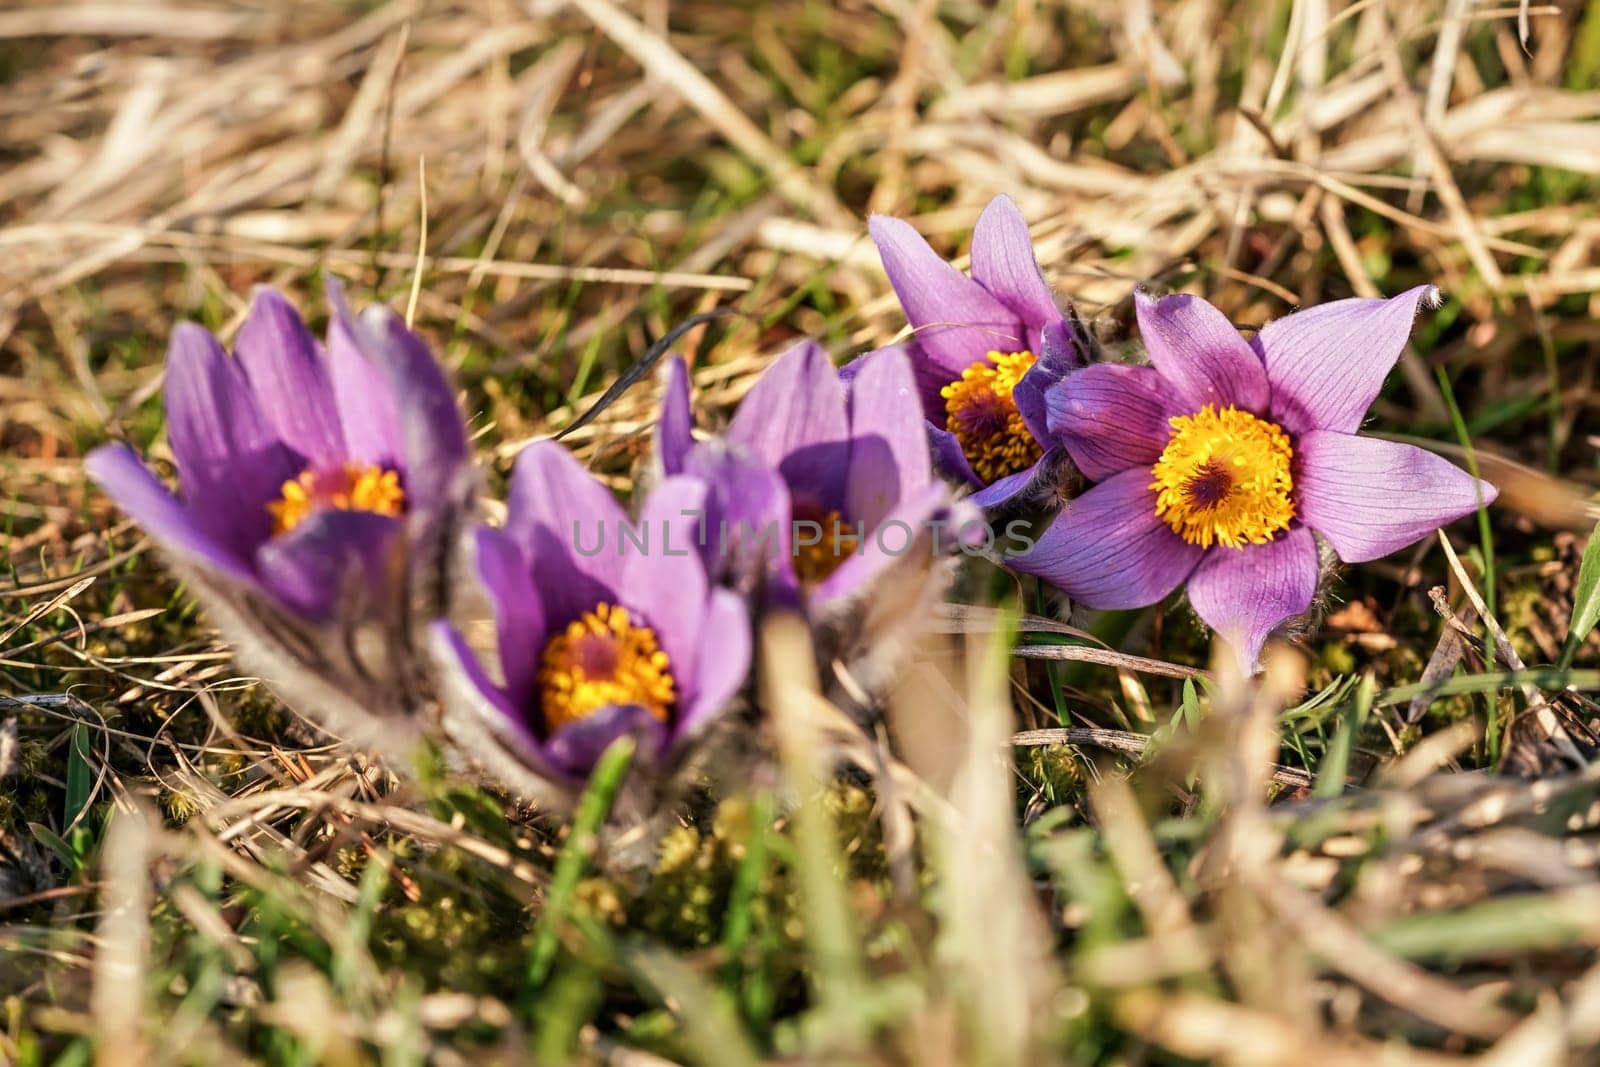 Sun shines on group of purple and yellow greater pasque flower - Pulsatilla grandis - growing in dry grass, close up detail by Ivanko